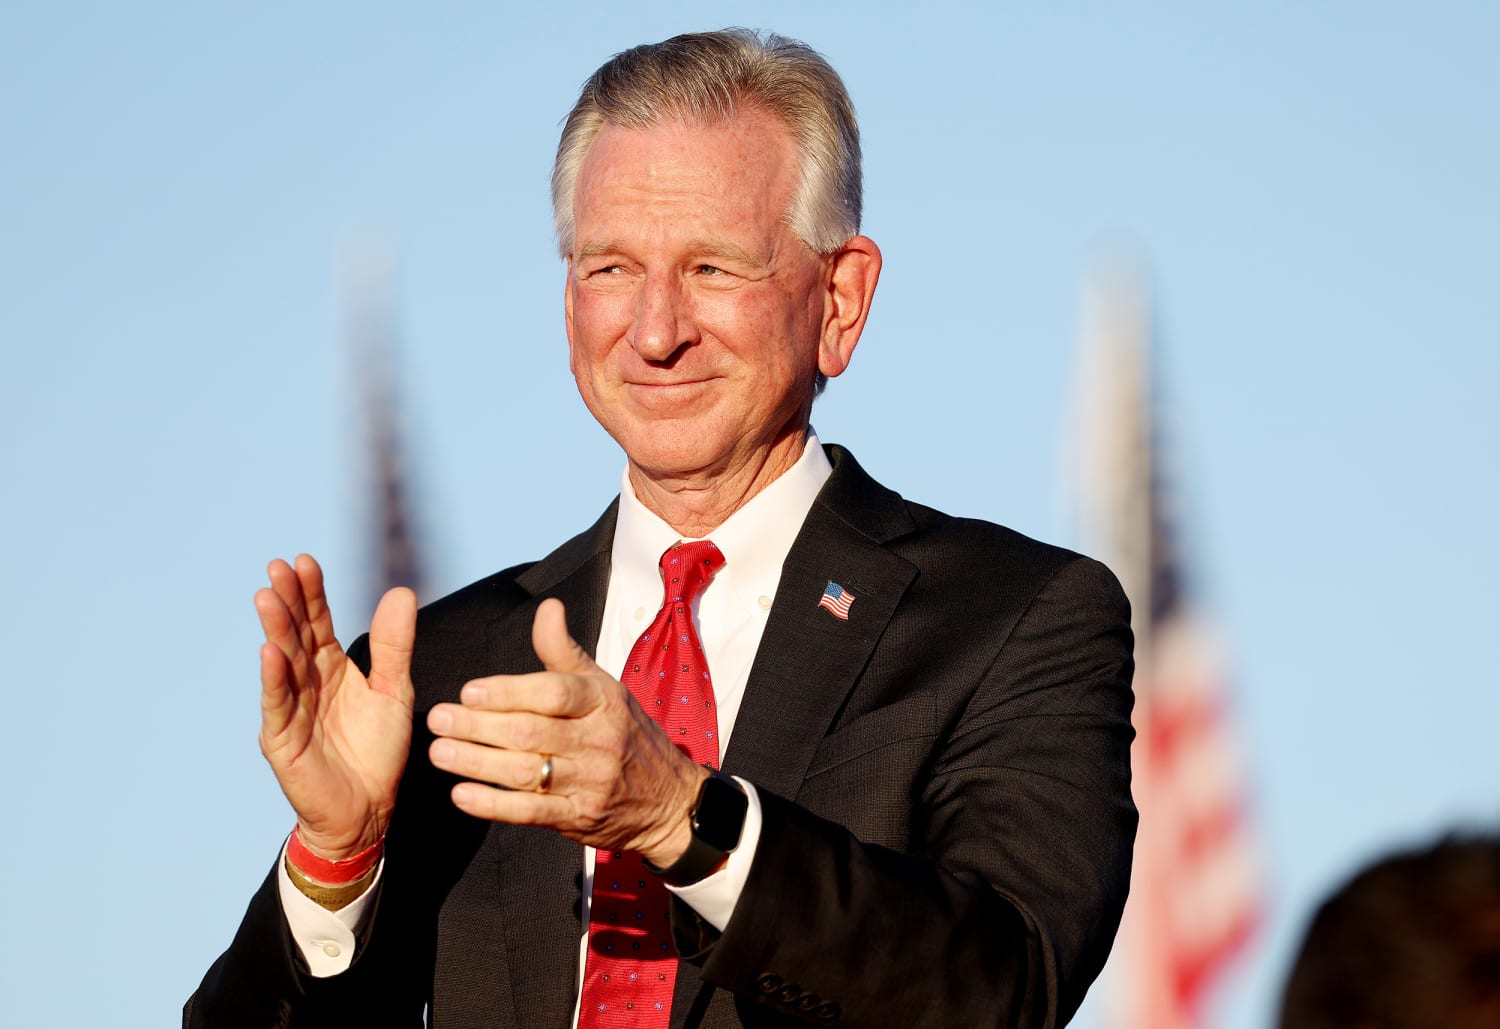 Tuberville picks up support from Republican presidential hopefuls